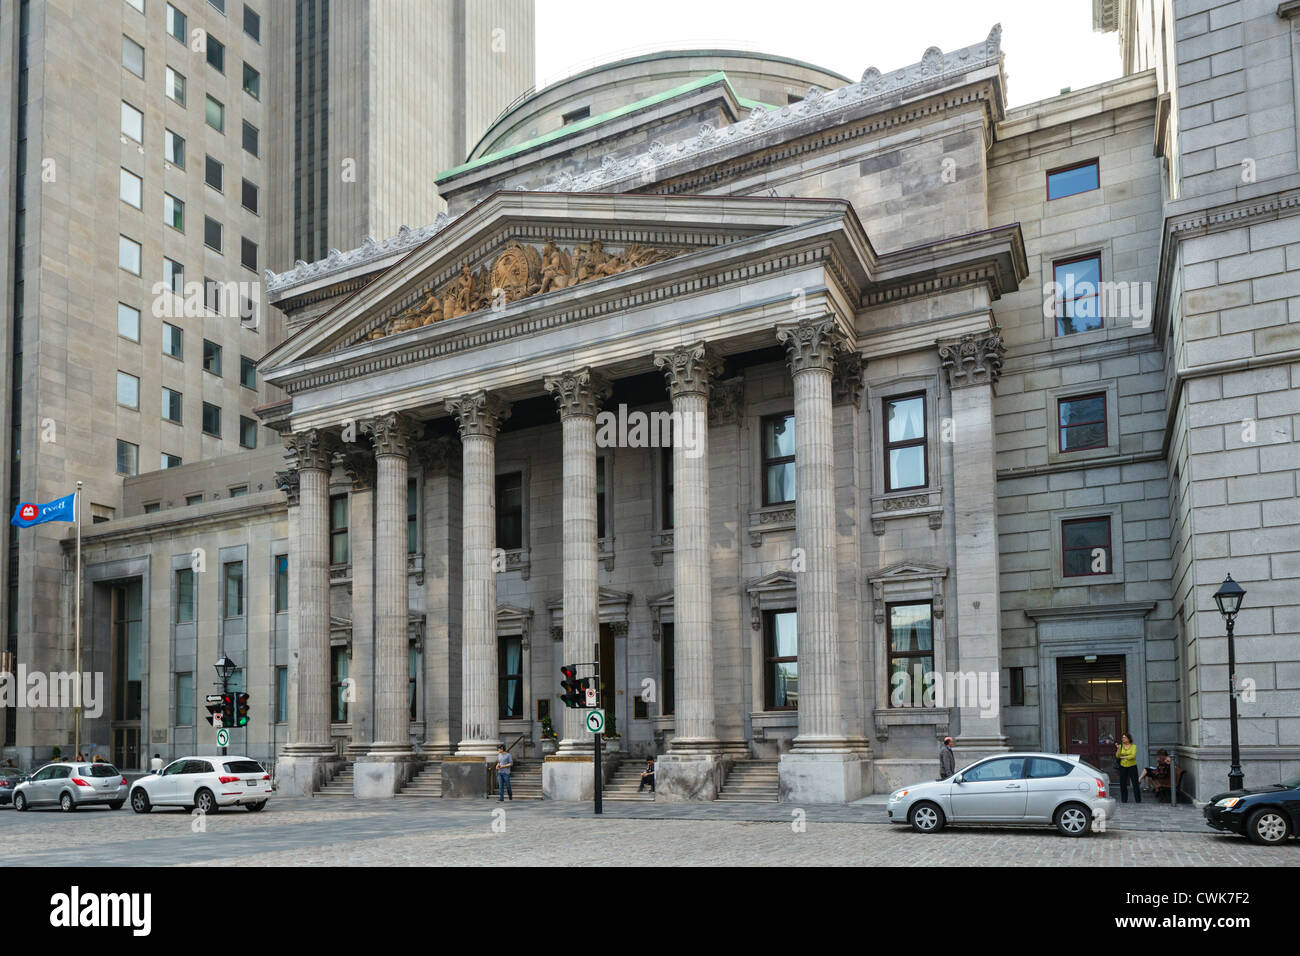 The Bank of Montreal building on the Place d'Armes, Rue Saint-Jacques, Vieux Montreal, Quebec, Canada Stock Photo